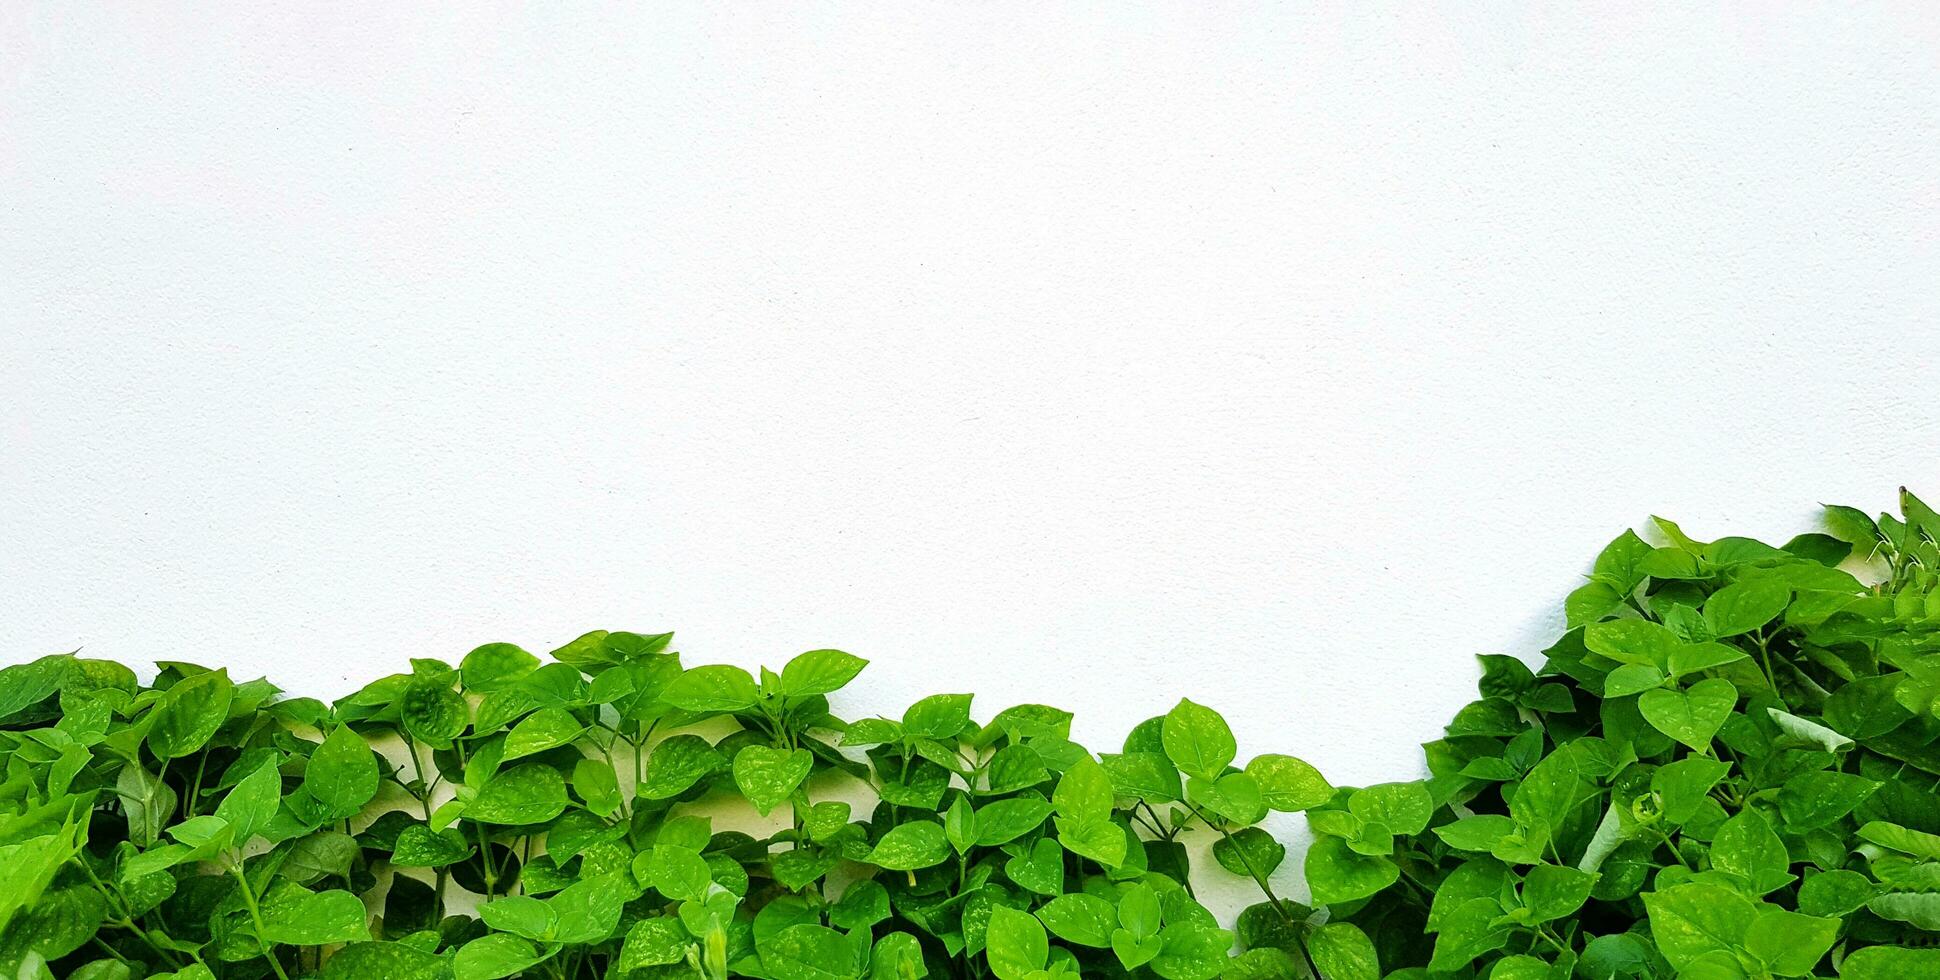 Green tree plant with white flower on rough brick wall for background with above copy space. Wallpaper, Garden, Growth, Beauty of Nature and Pattern concept. photo